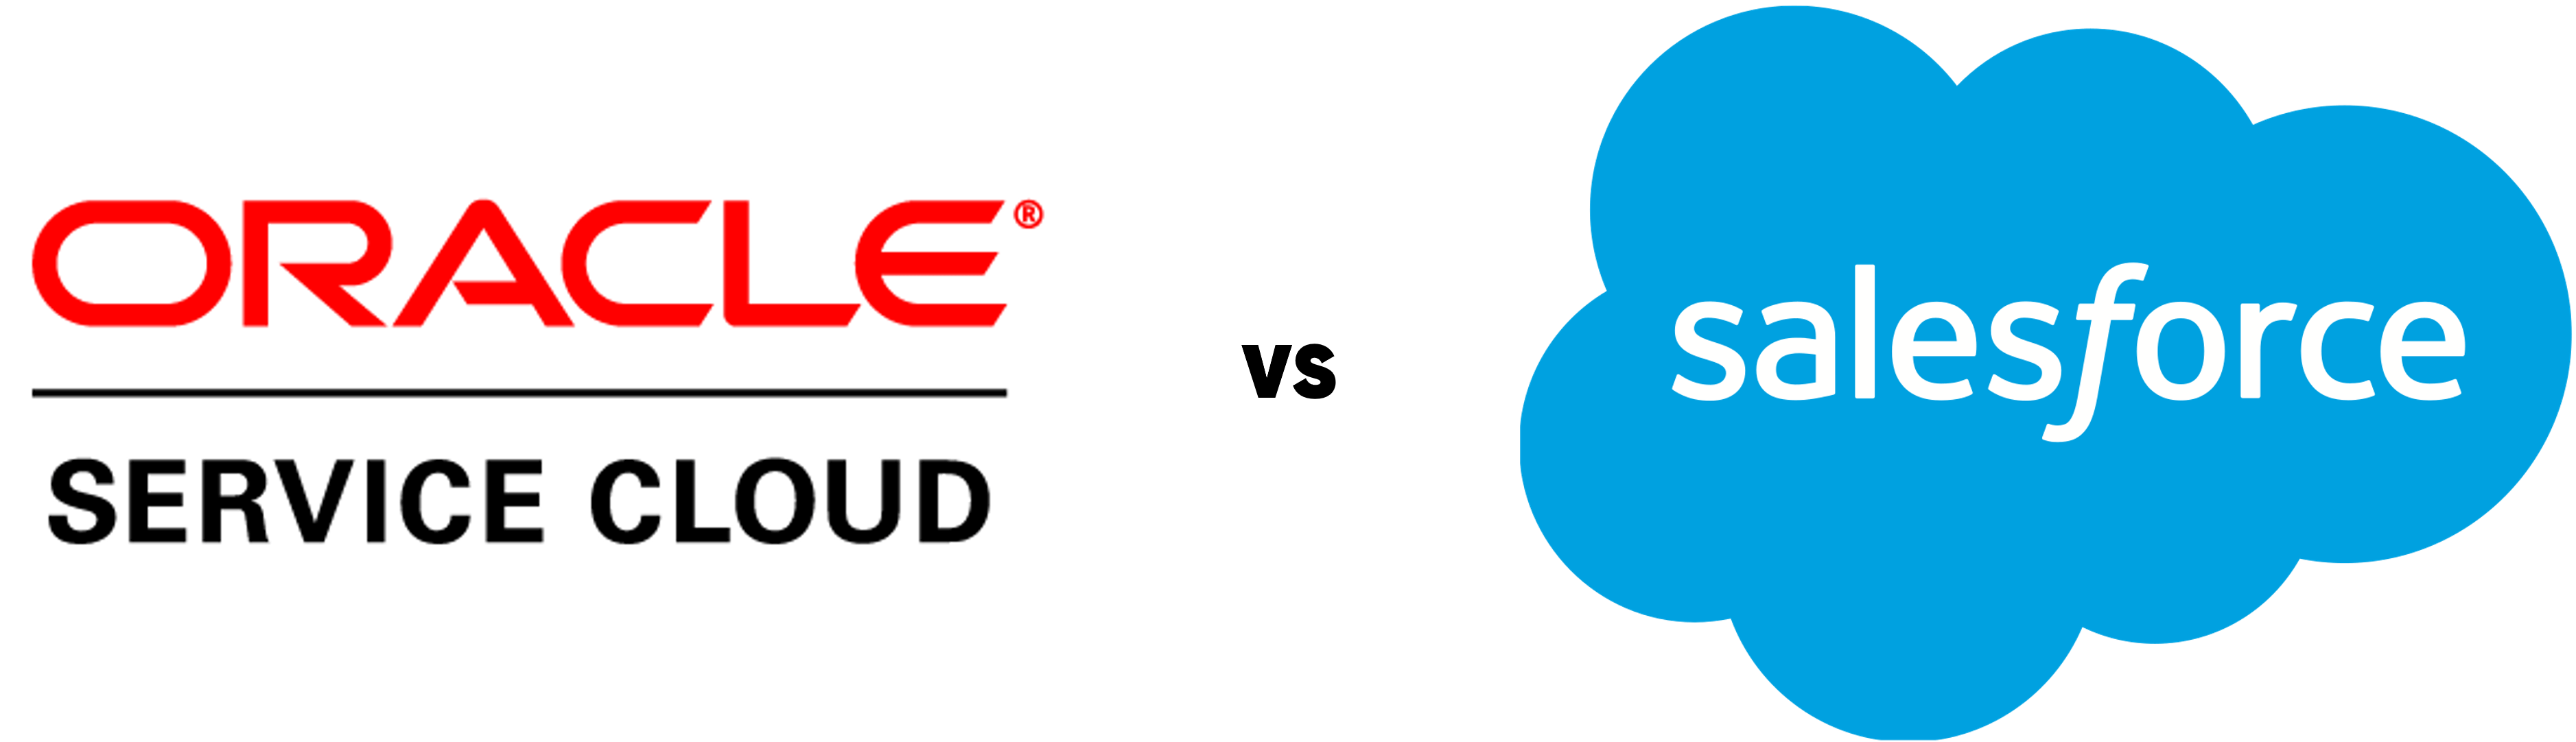 5 key differences between Oracle B2C Service and Salesforce CRM application